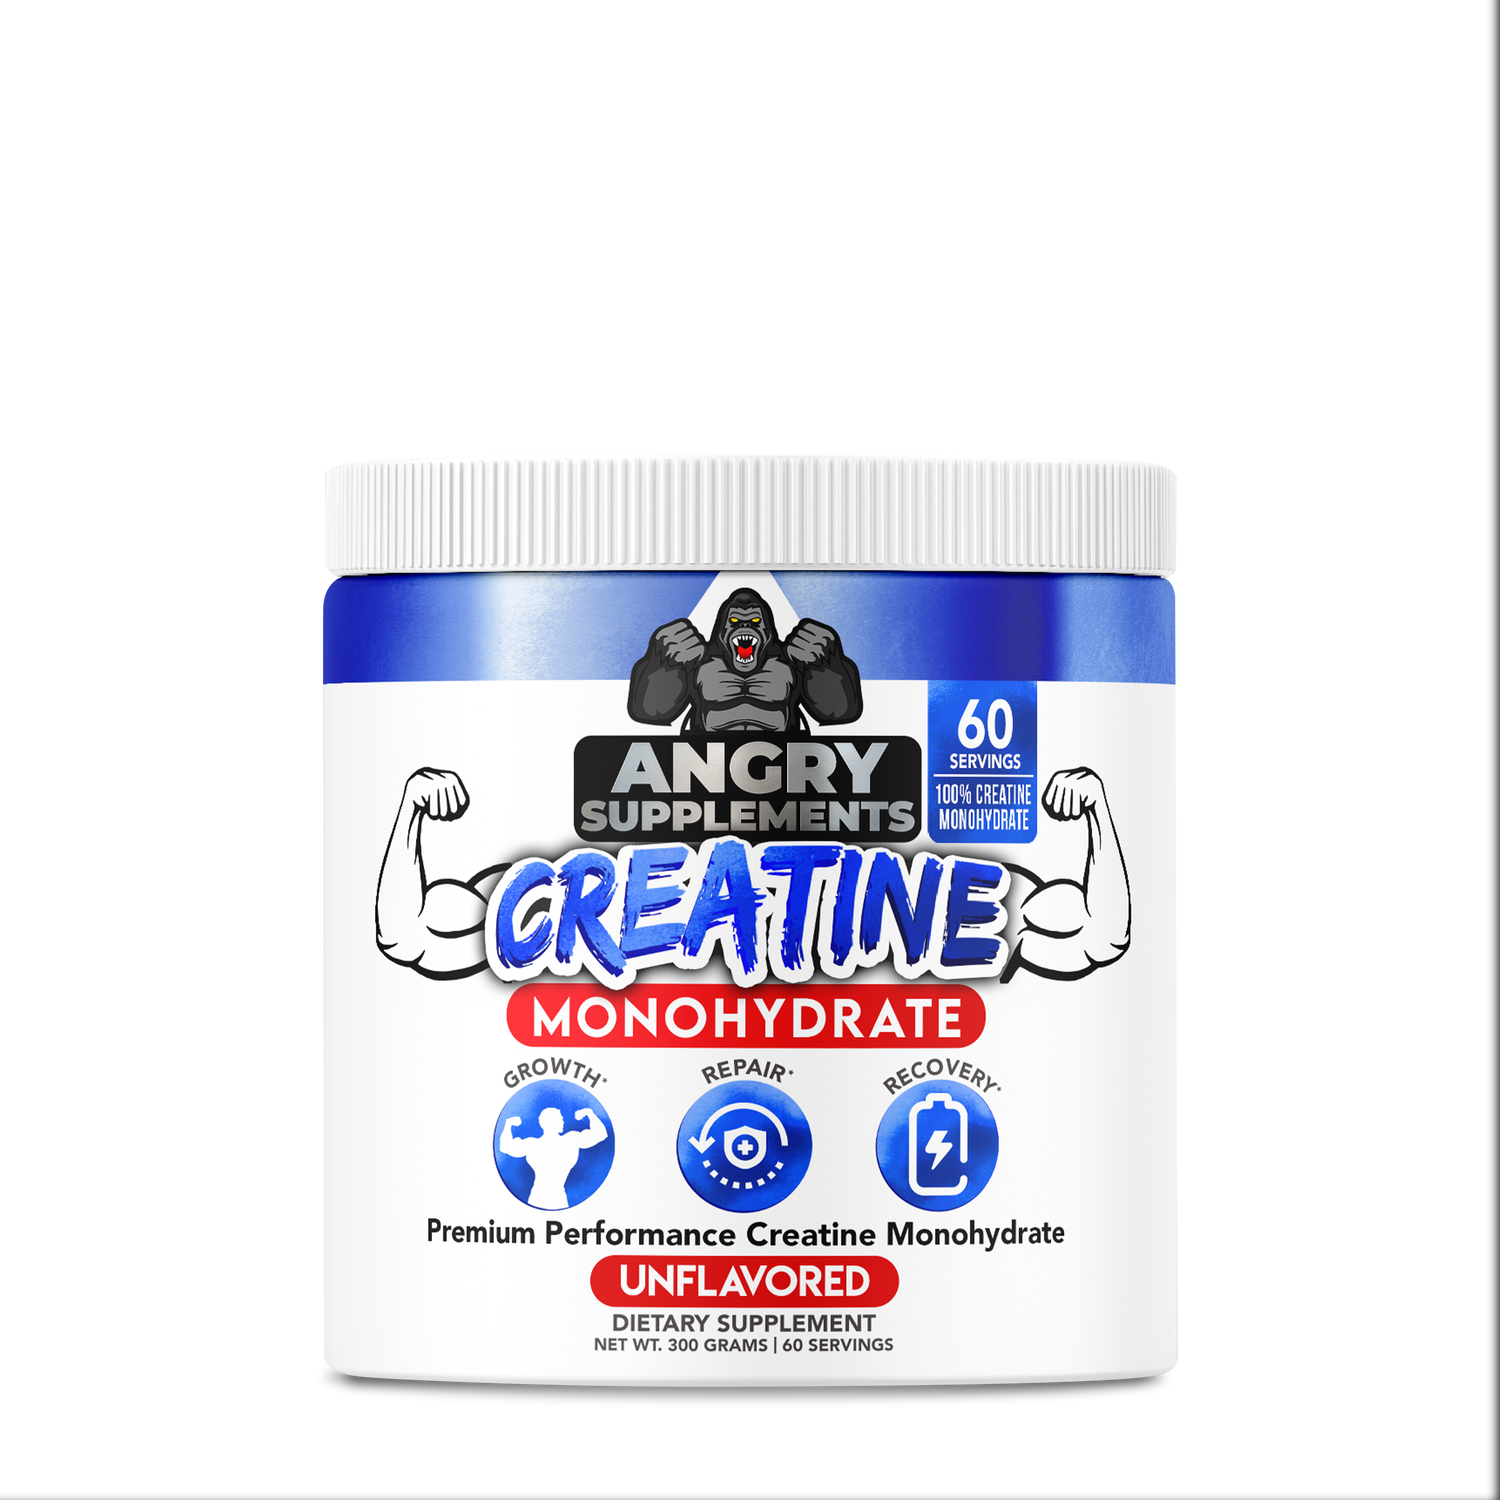 Angry Supplements Creatine Monohydrate